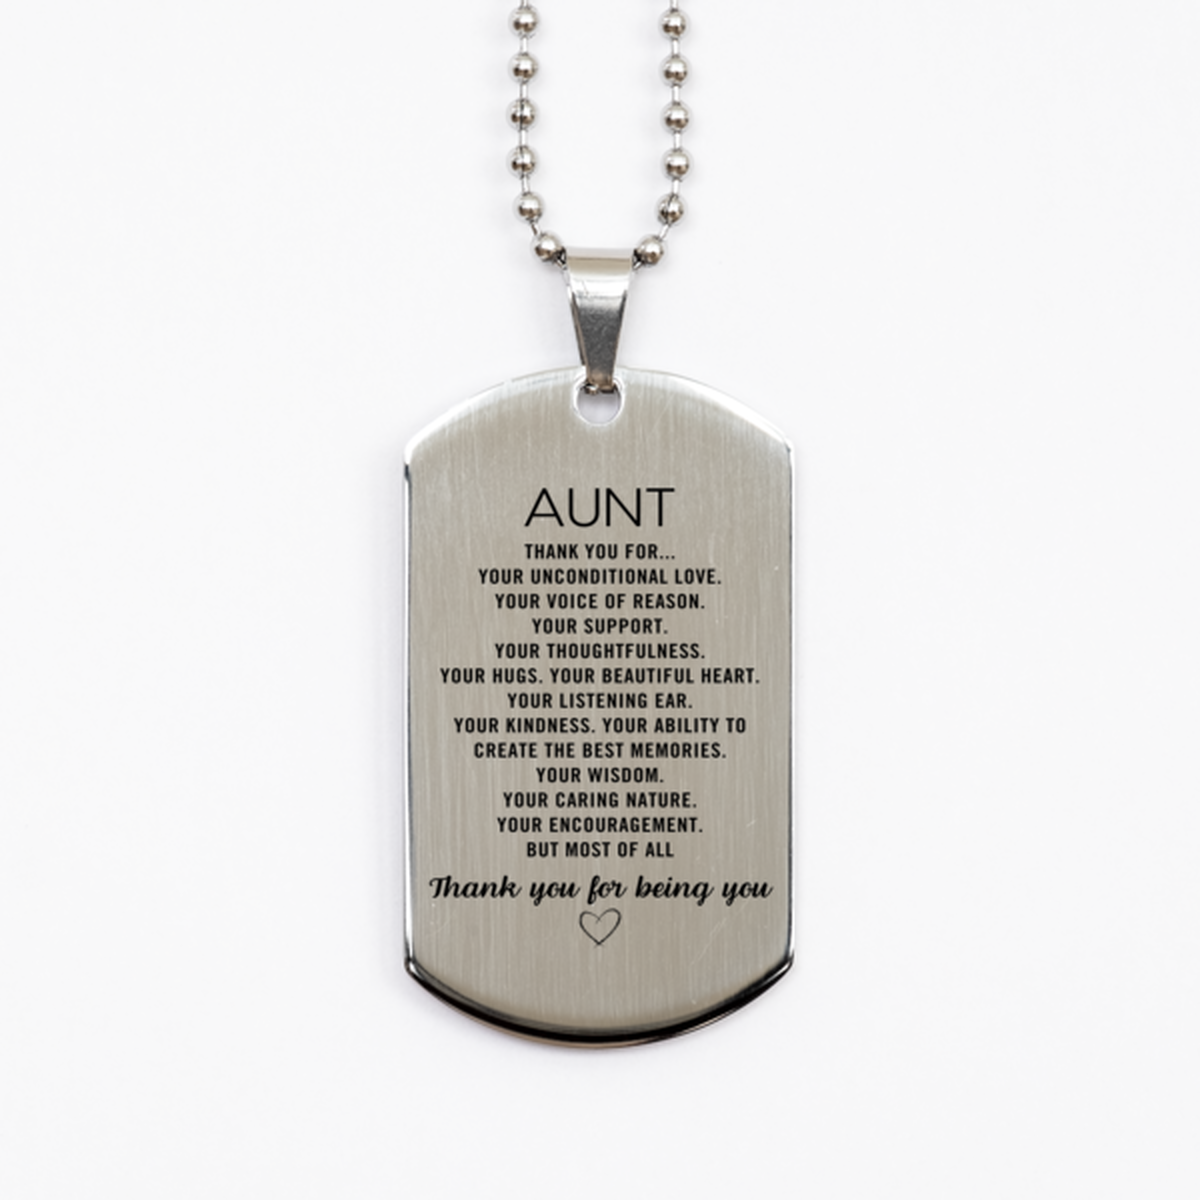 Aunt Silver Dog Tag Custom, Engraved Gifts For Aunt Christmas Graduation Birthday Gifts for Men Women Aunt Thank you for Your unconditional love